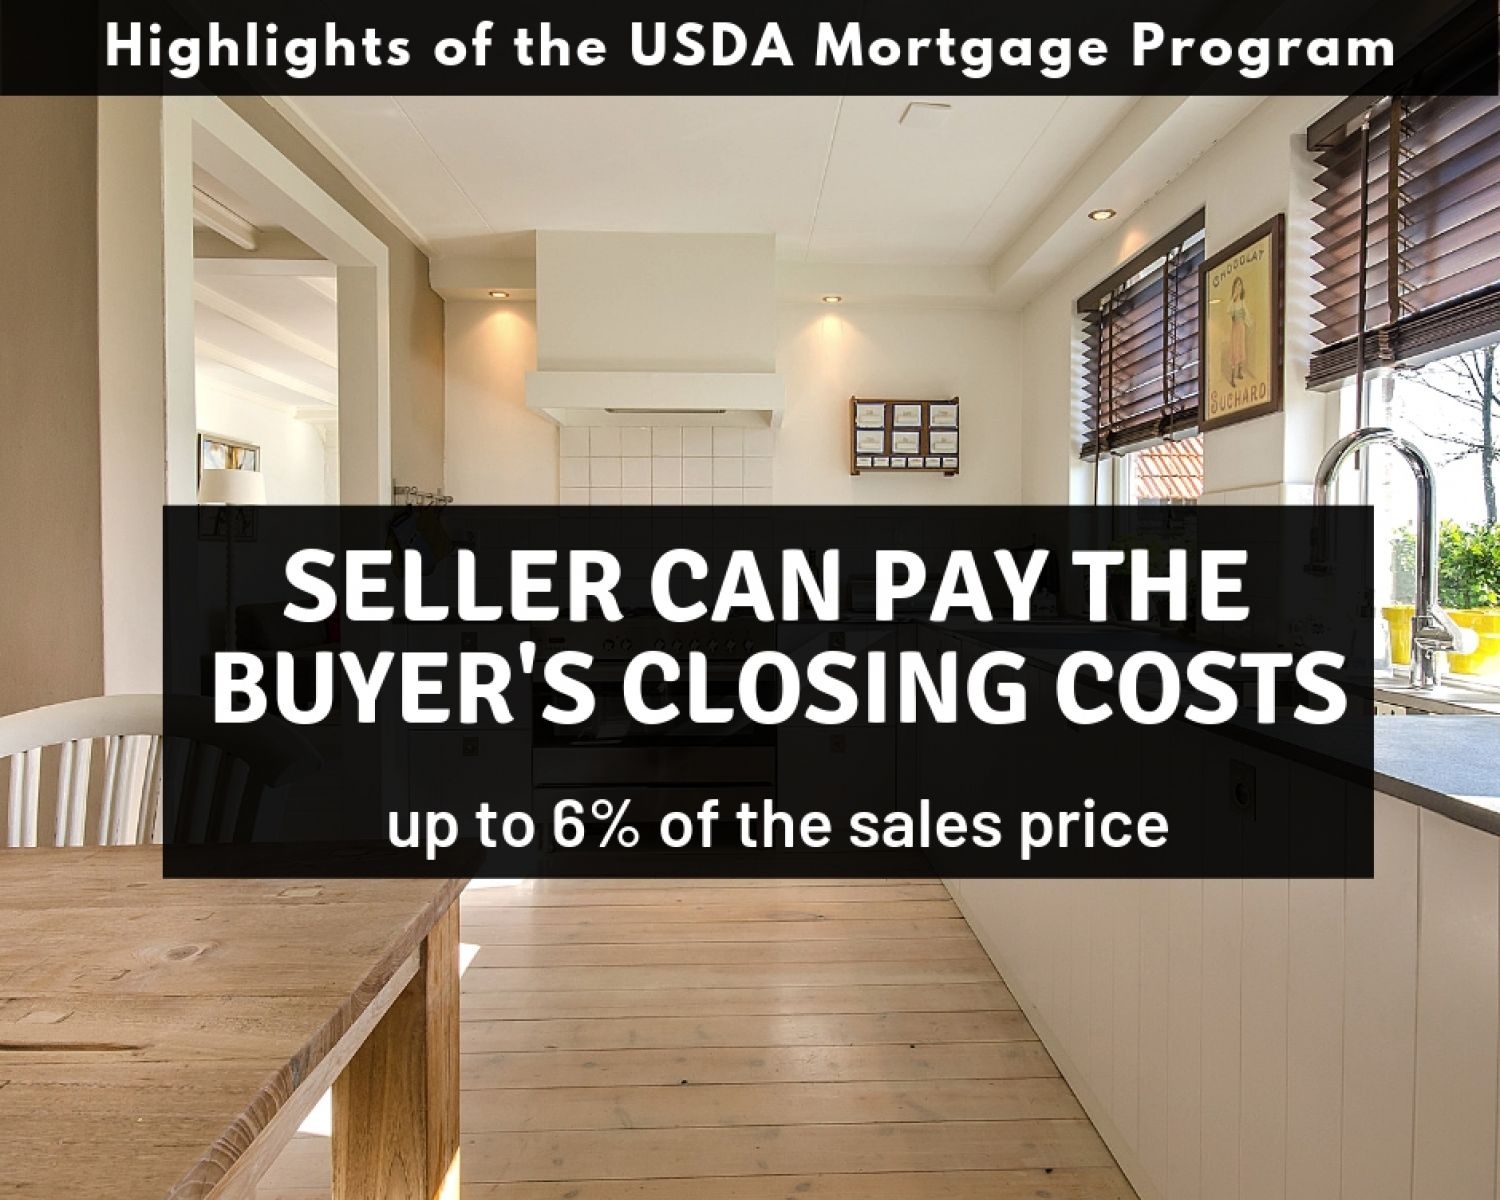 The seller can pay your closing costs with a Pennsylvania USDA Mortgage